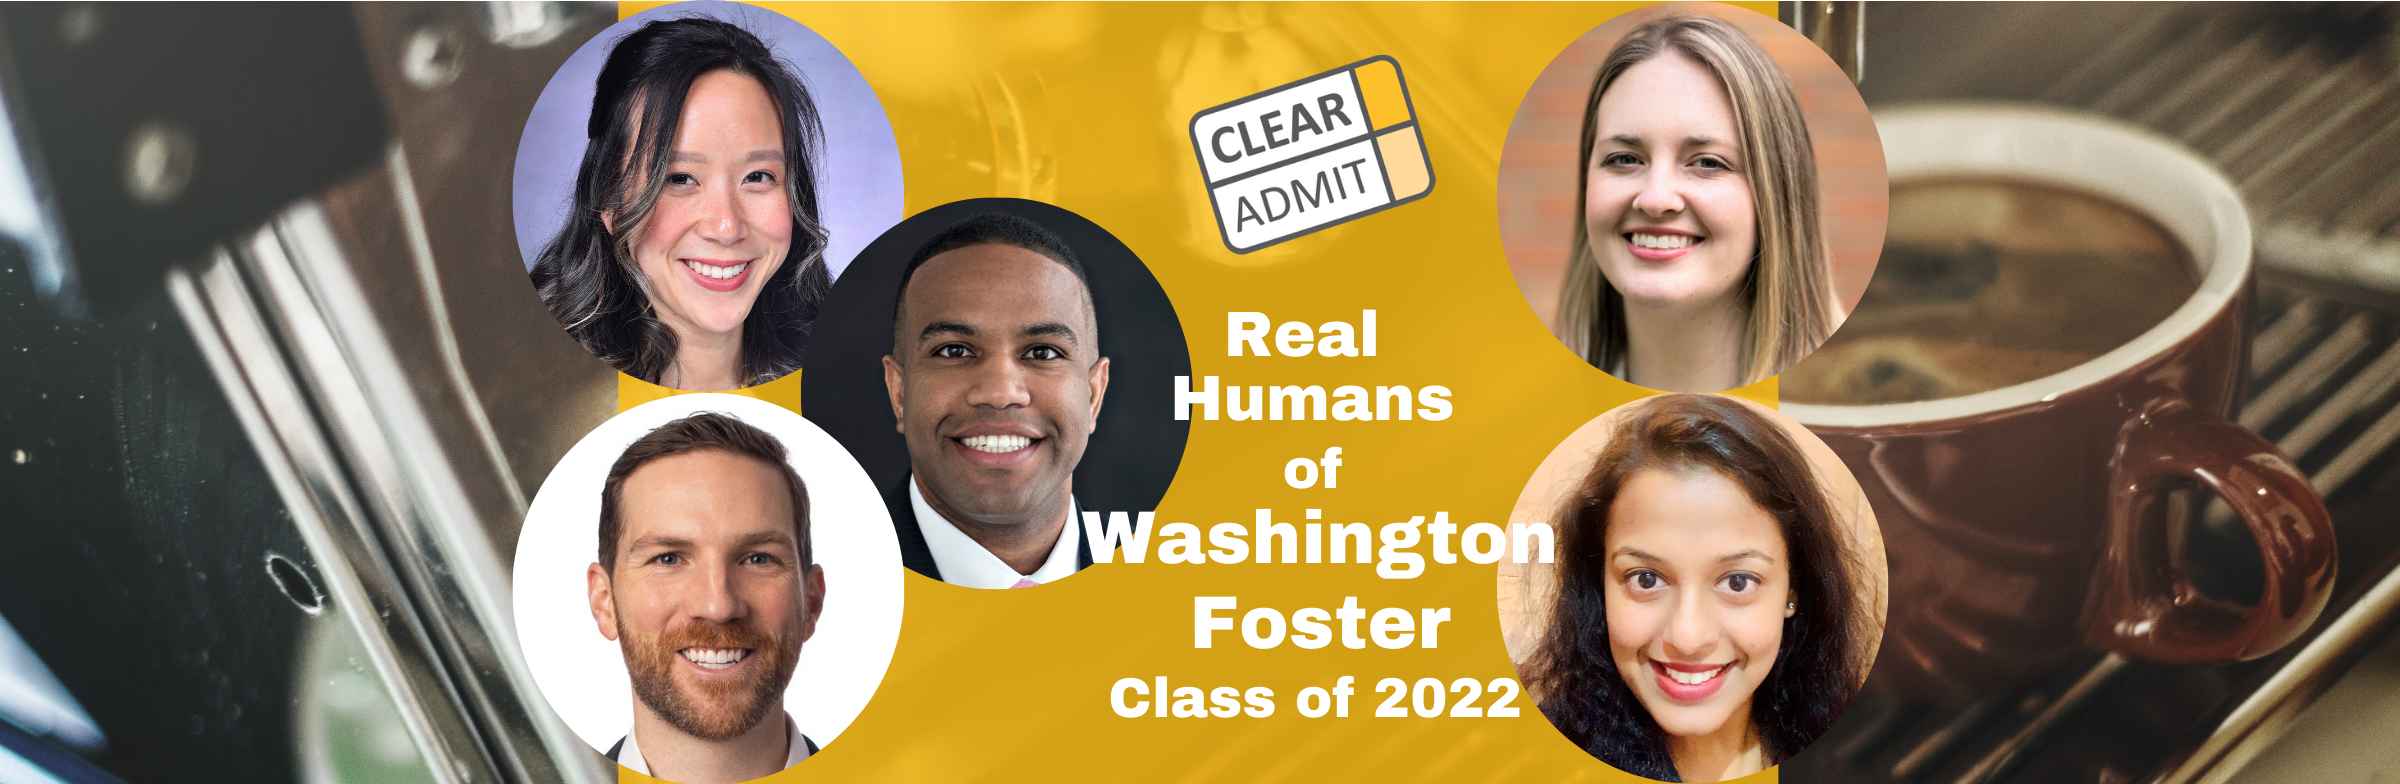 Image for Real Humans of the Washington Foster School of Business MBA Class of 2022